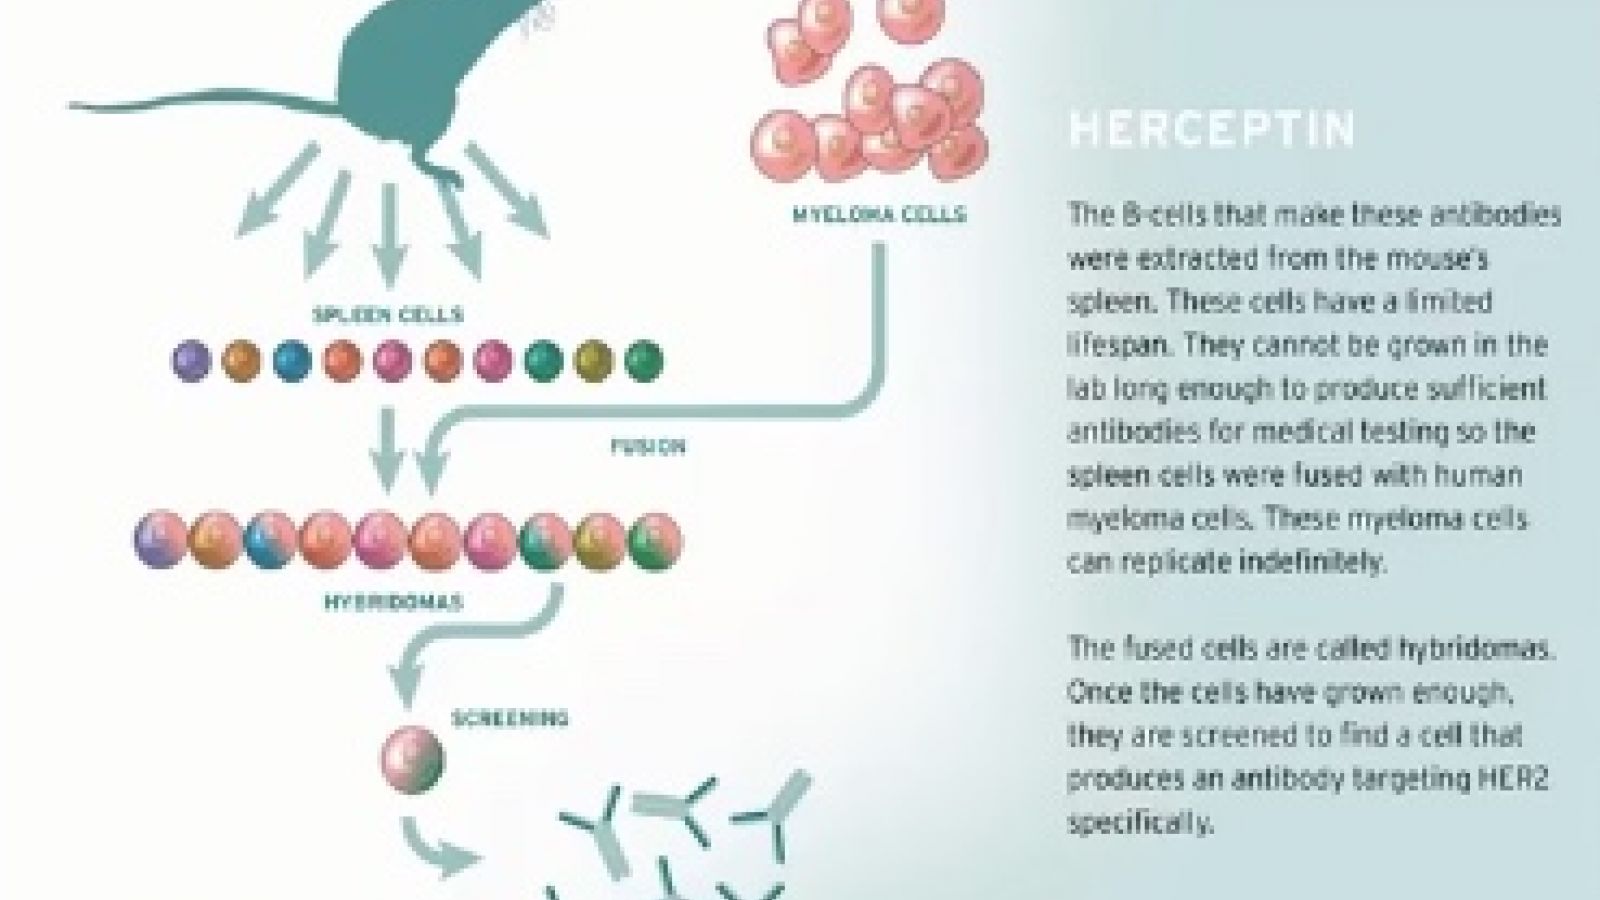 Herceptin - first monoclonal antibody treatment for cancer